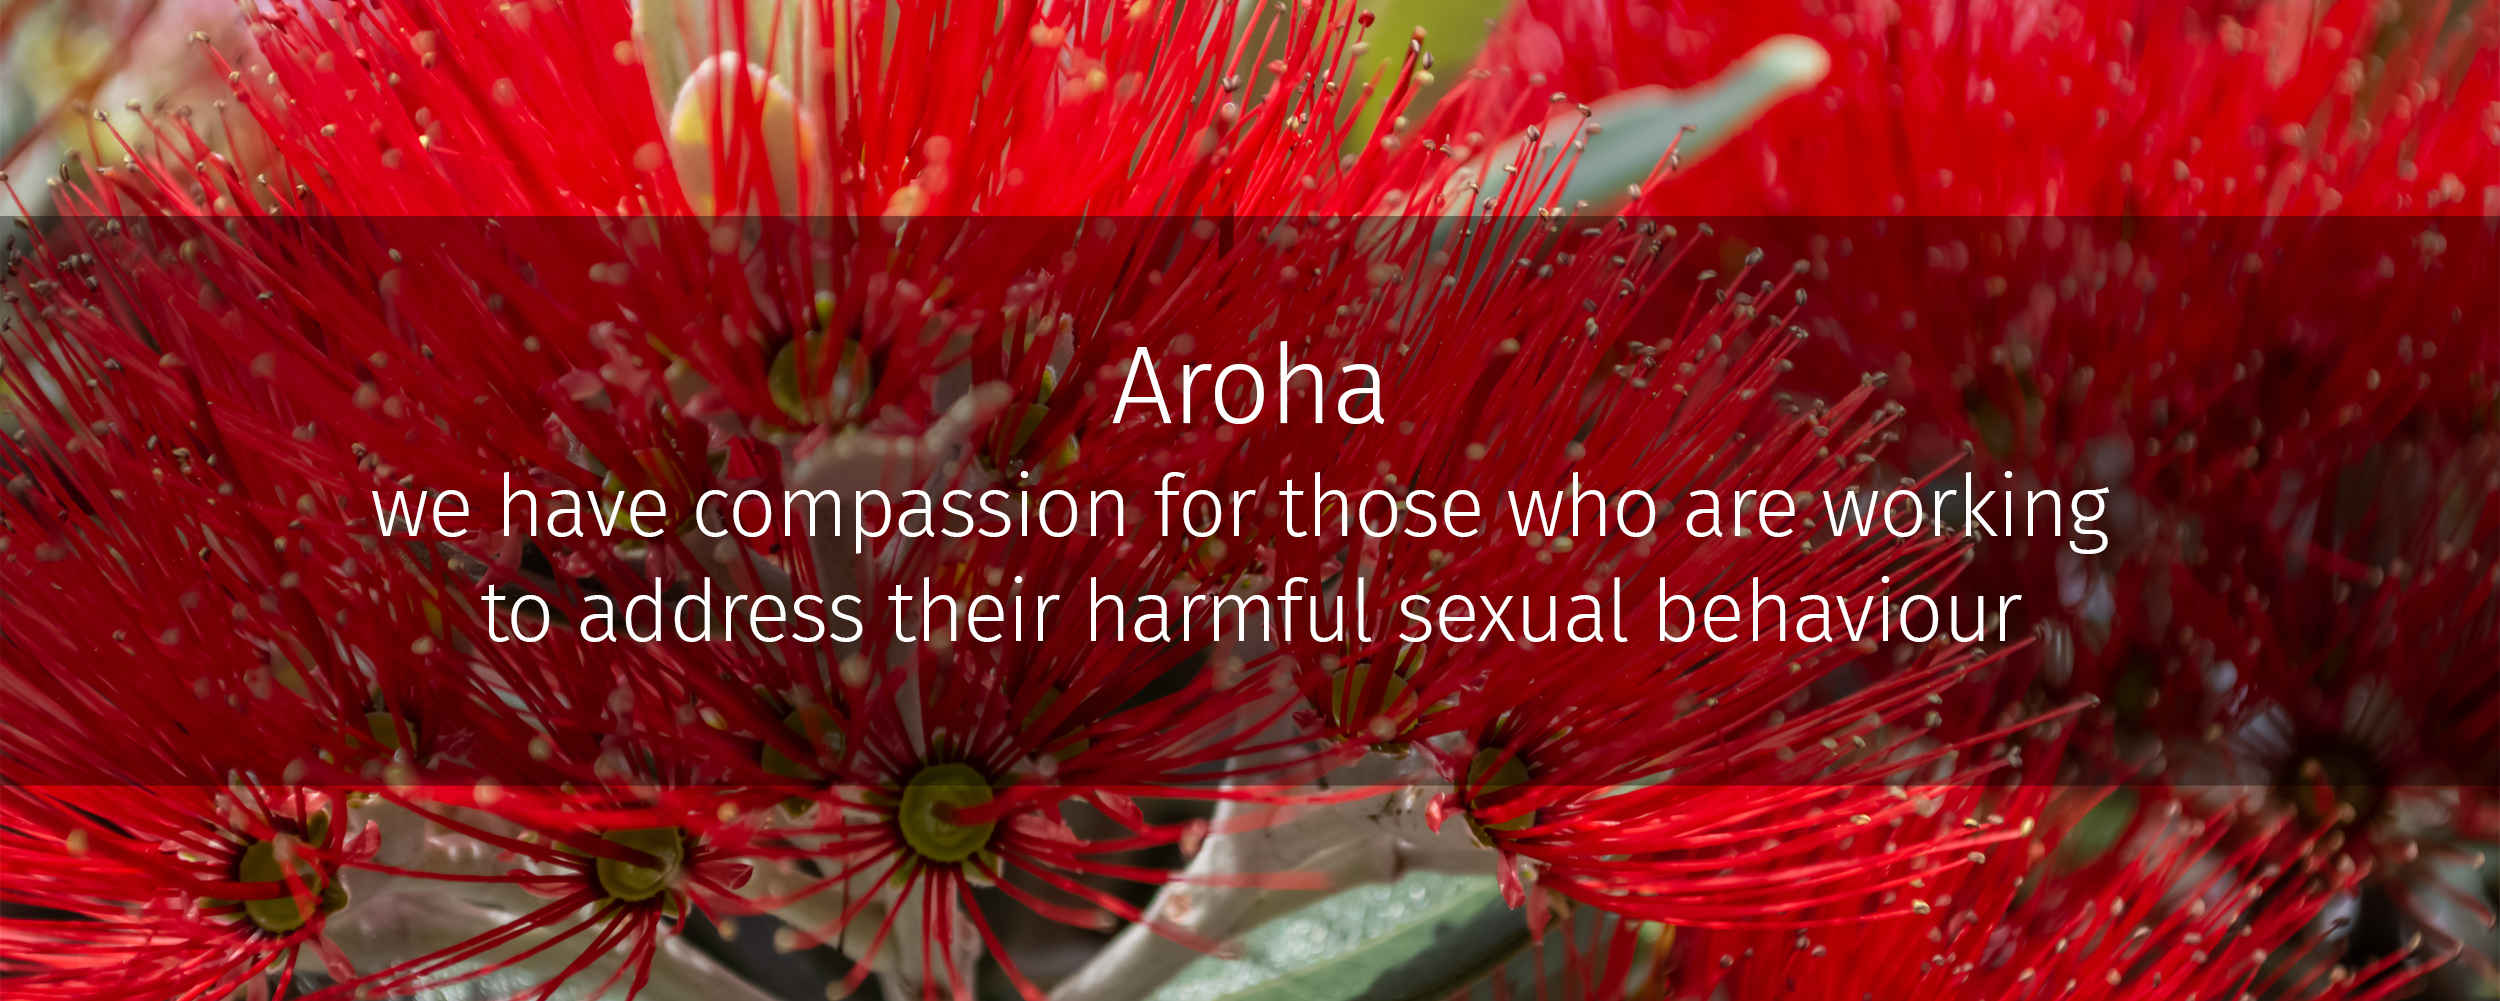 Aroha we have compassion for those who are working to address their harmful sexual behaviour